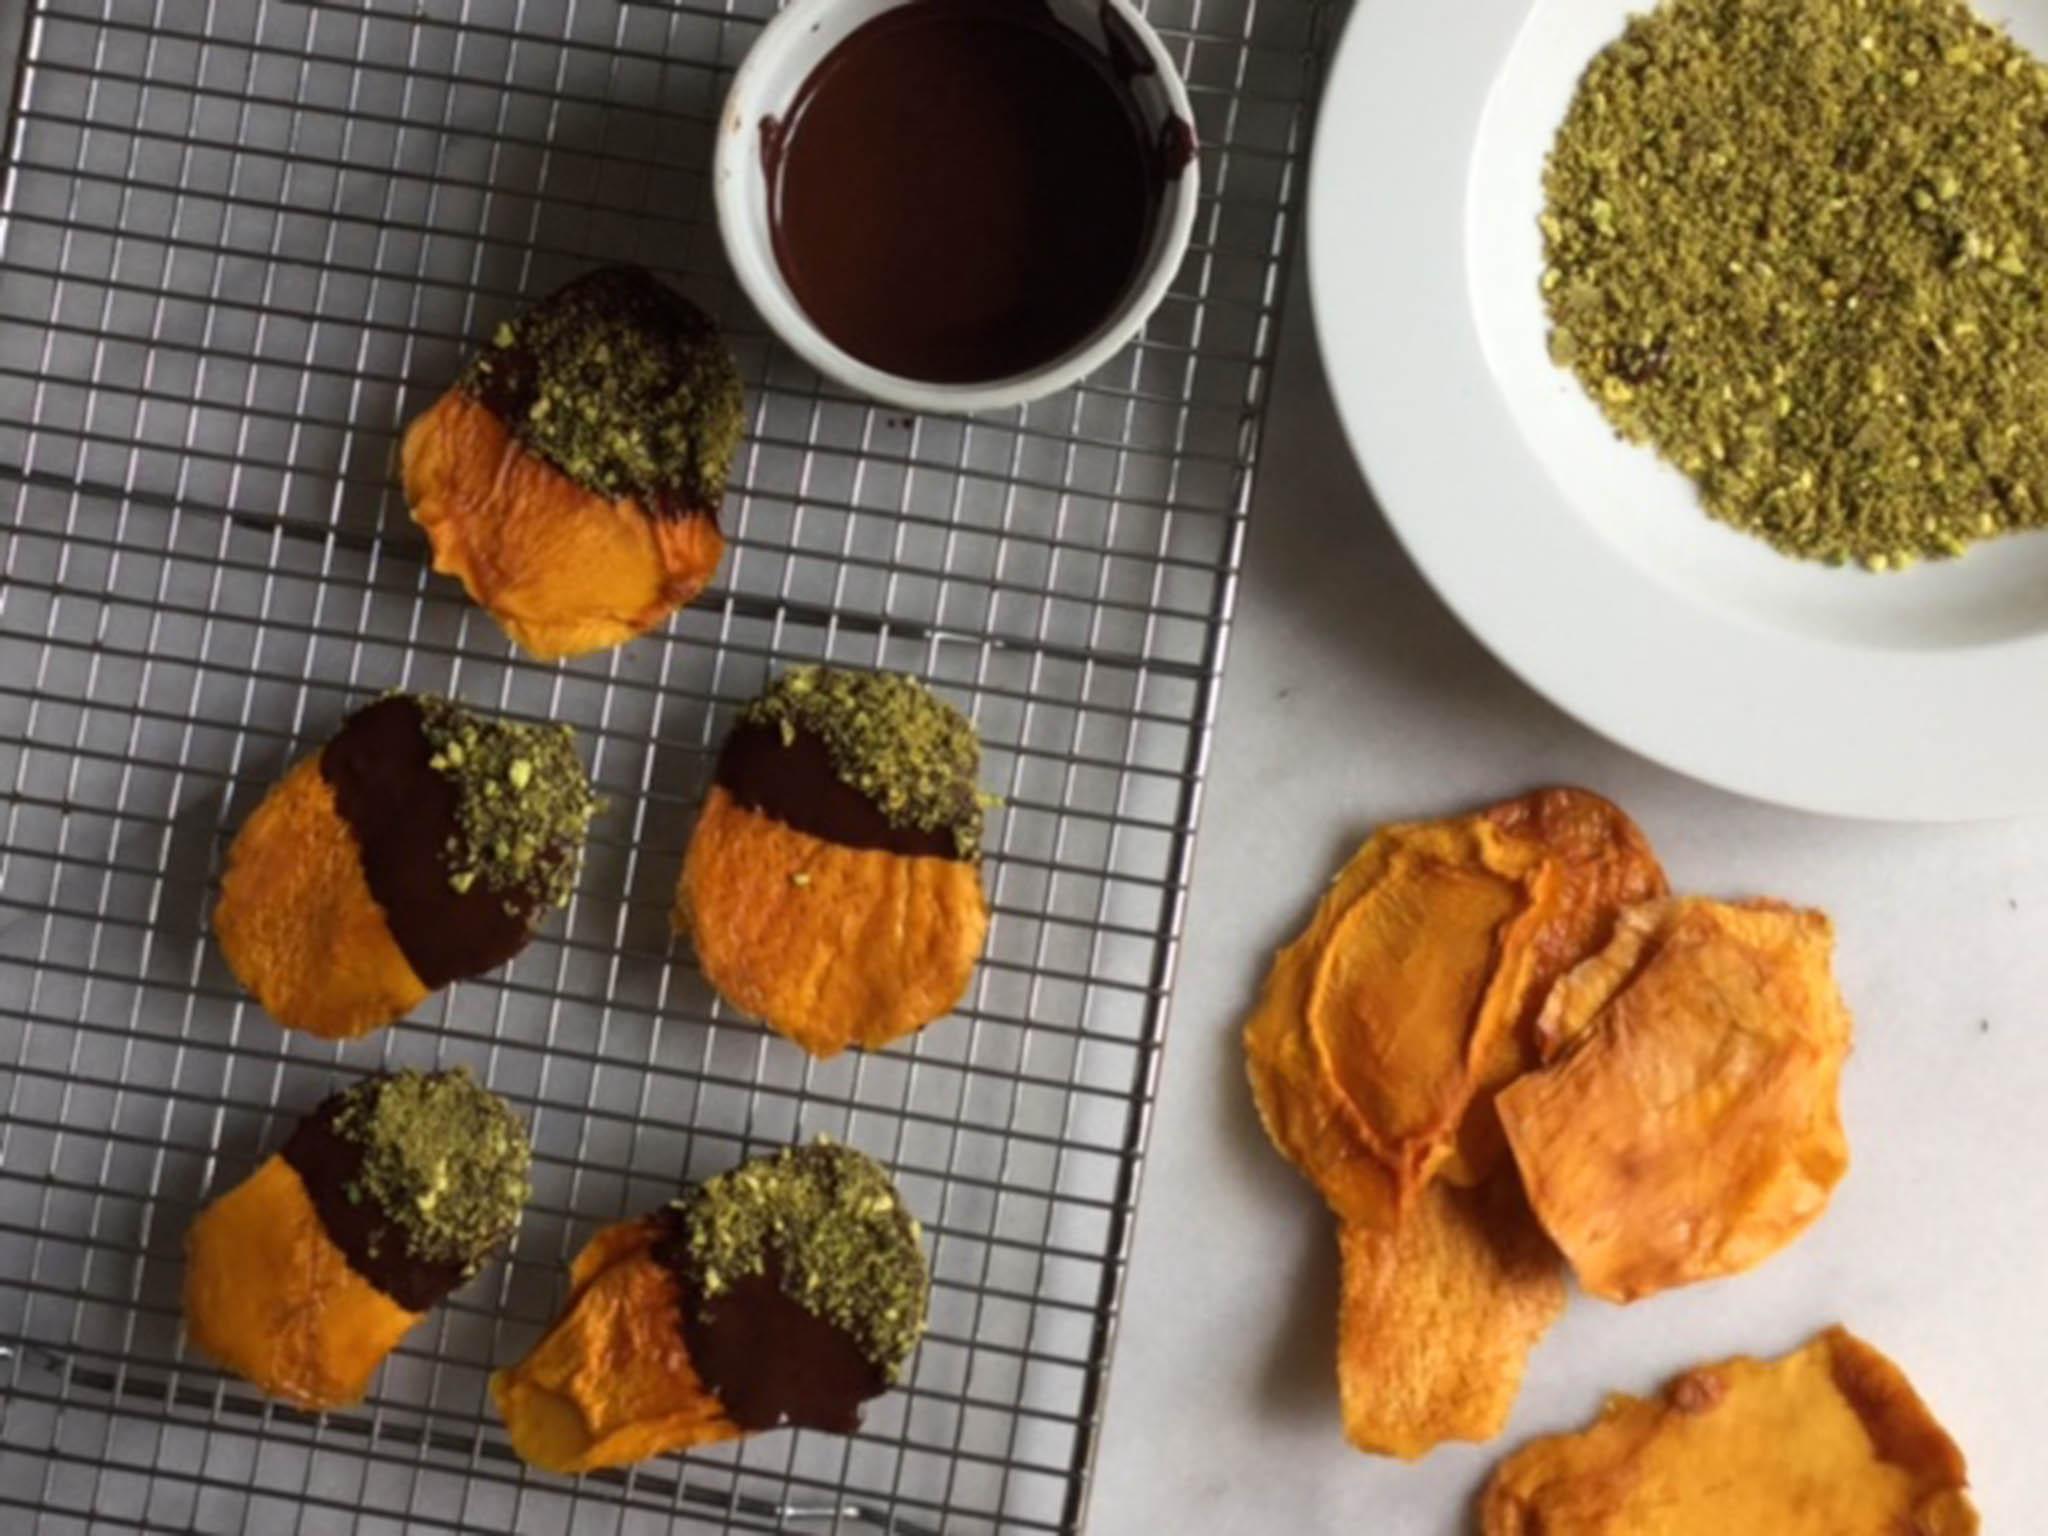 Save the sweets for the trick-or-treaters and delight in your own homemade Hallow’s Eve treats